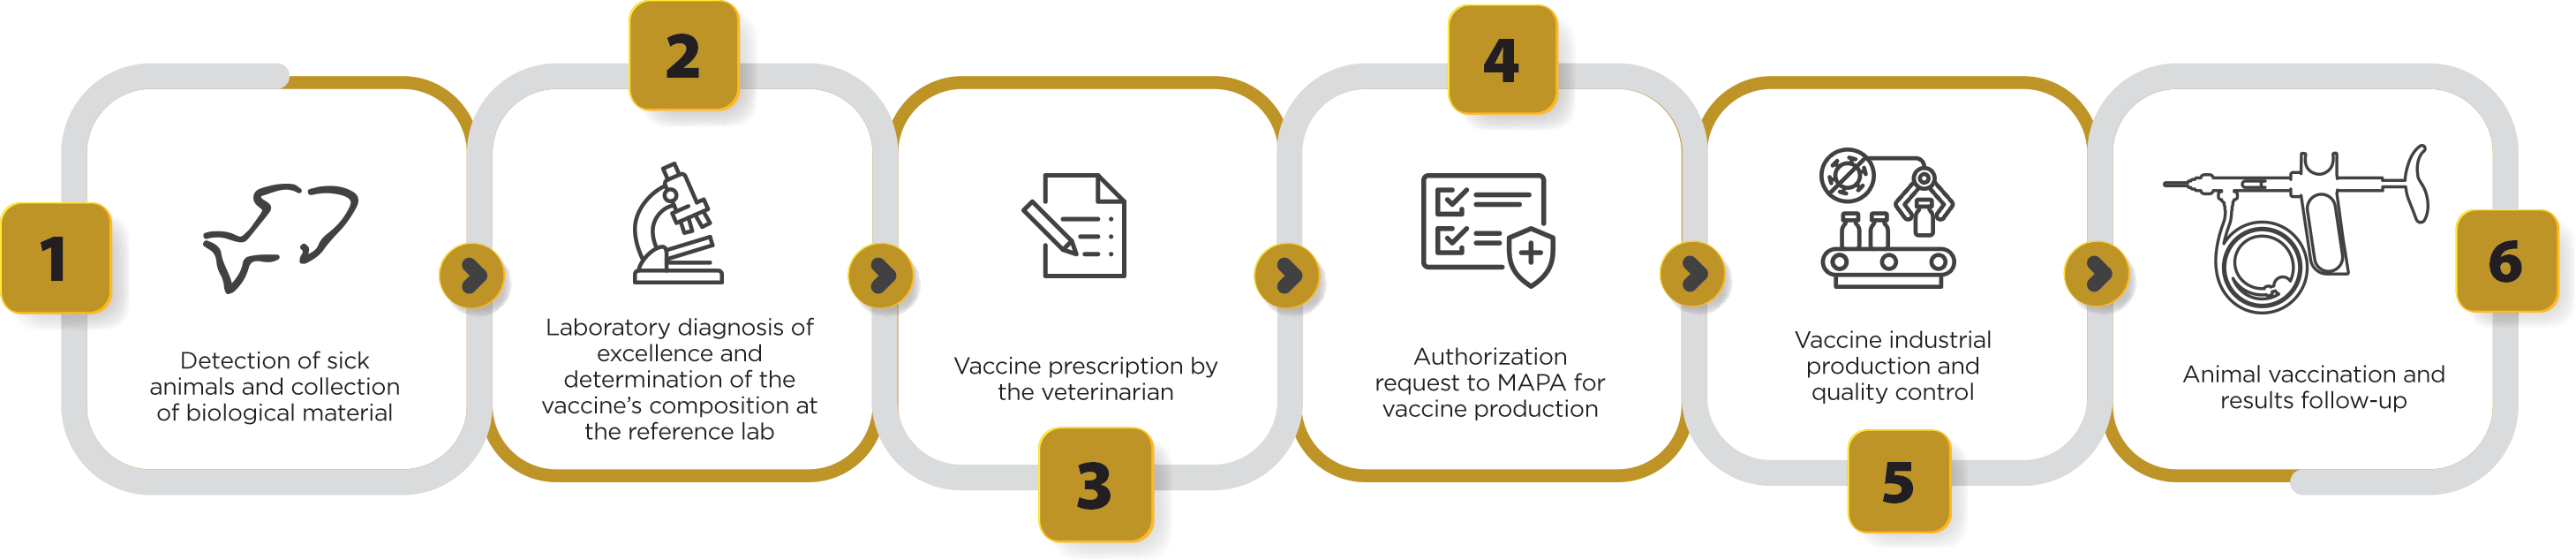 Figure 4. Key steps in the process of autogenous vaccines production in Brazil.